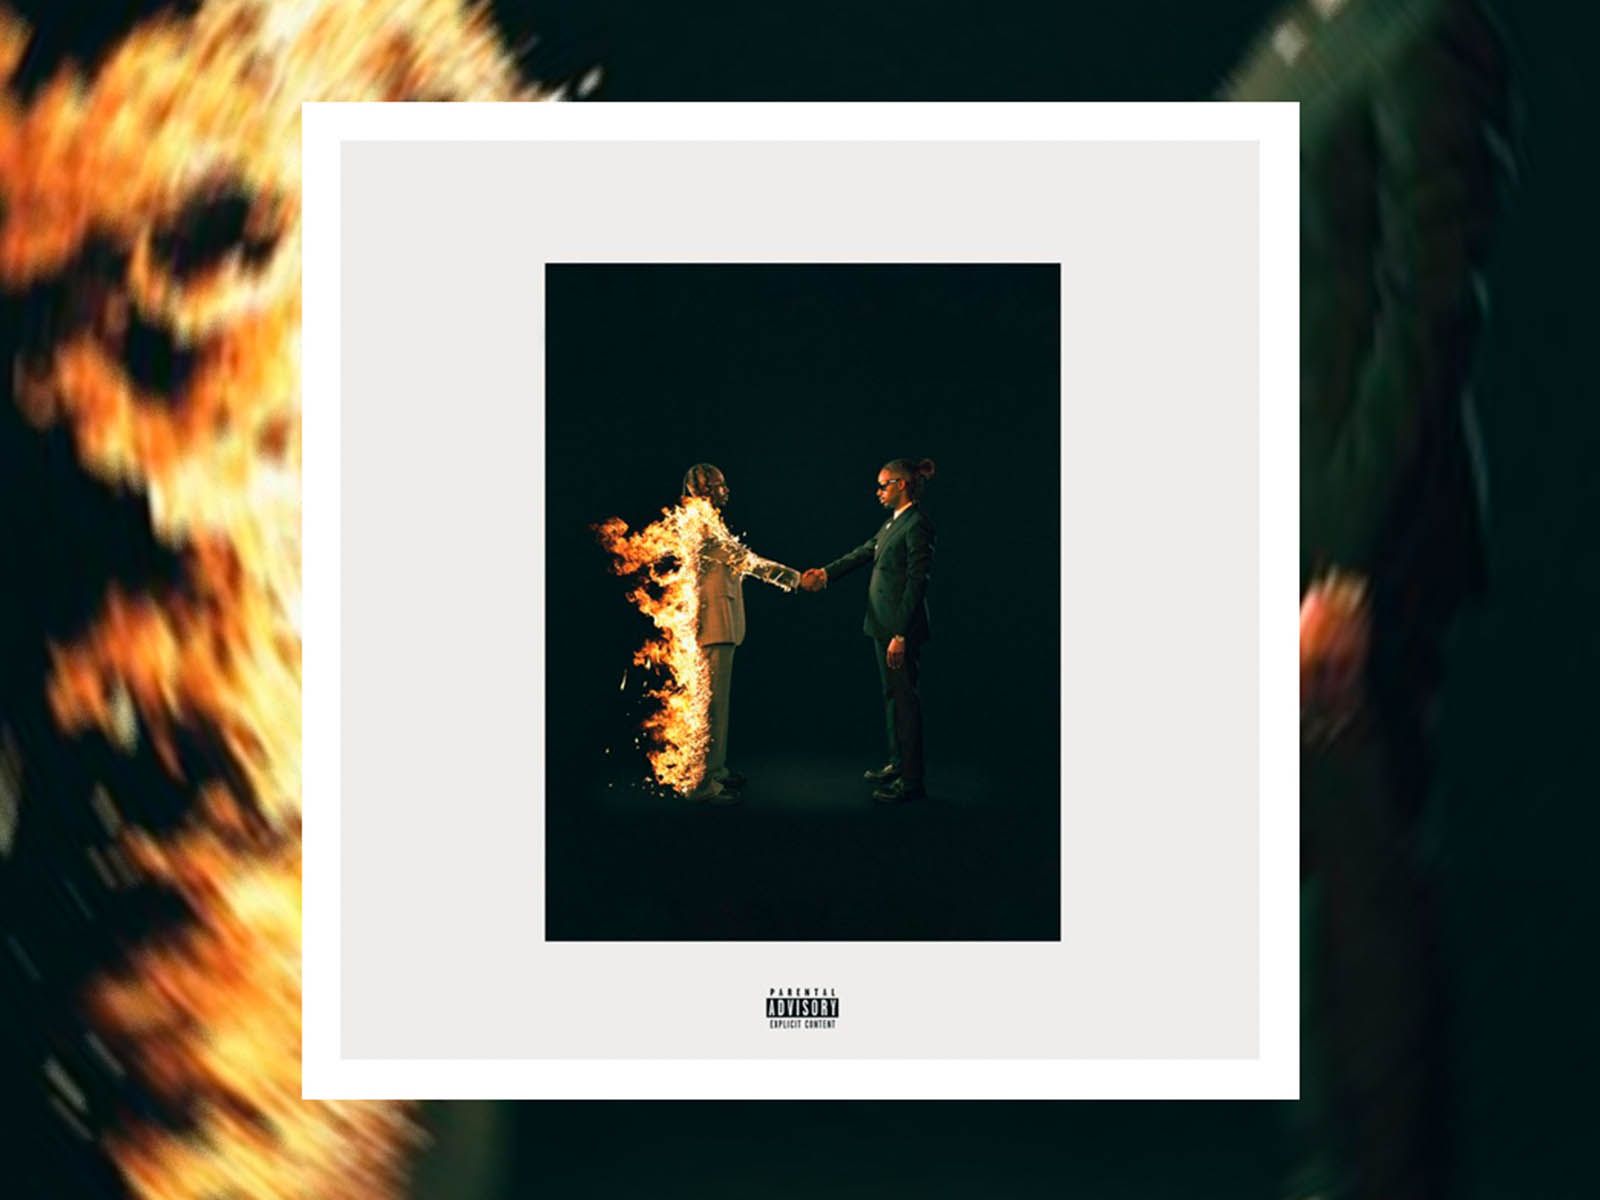 Metro Boomin releases album with top collaborations